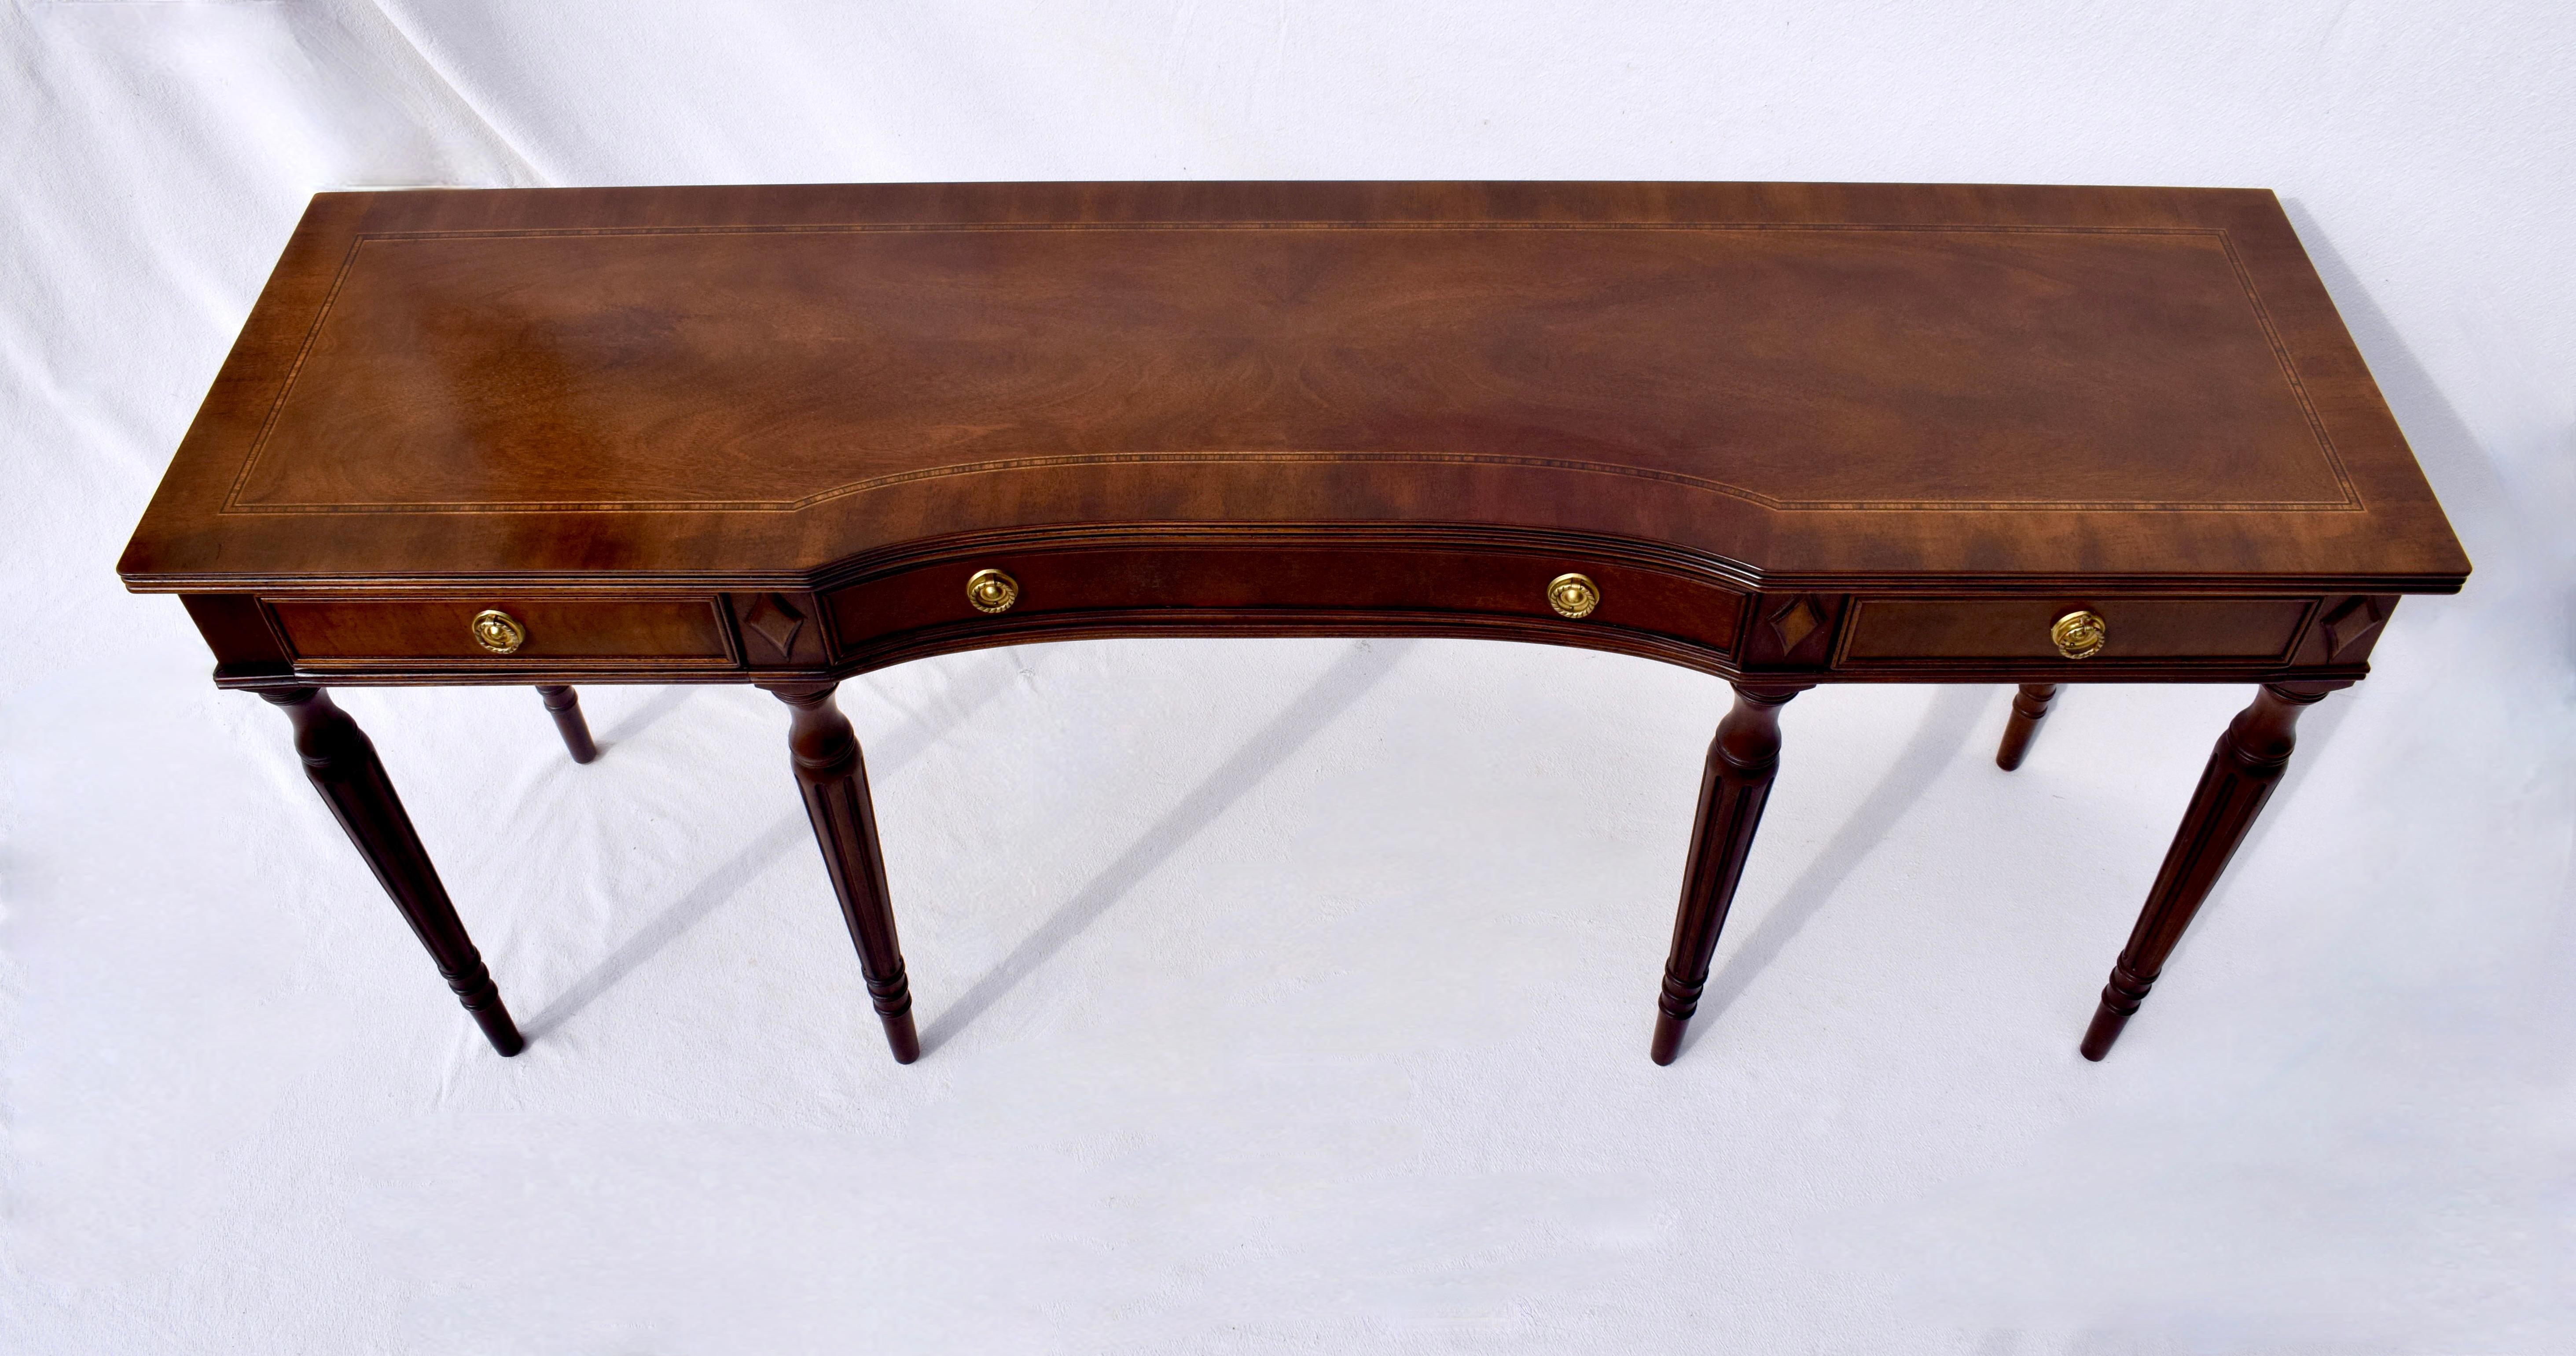 Henredon Furniture Traditional Regency style Mahogany three drawer console or sofa table with inlaid trim and banded edge; circa 1980's. Gorgeous wood grains. Measures: 66 wide x 18 deep x 29.25 high.  Excellent condition & ready for use.